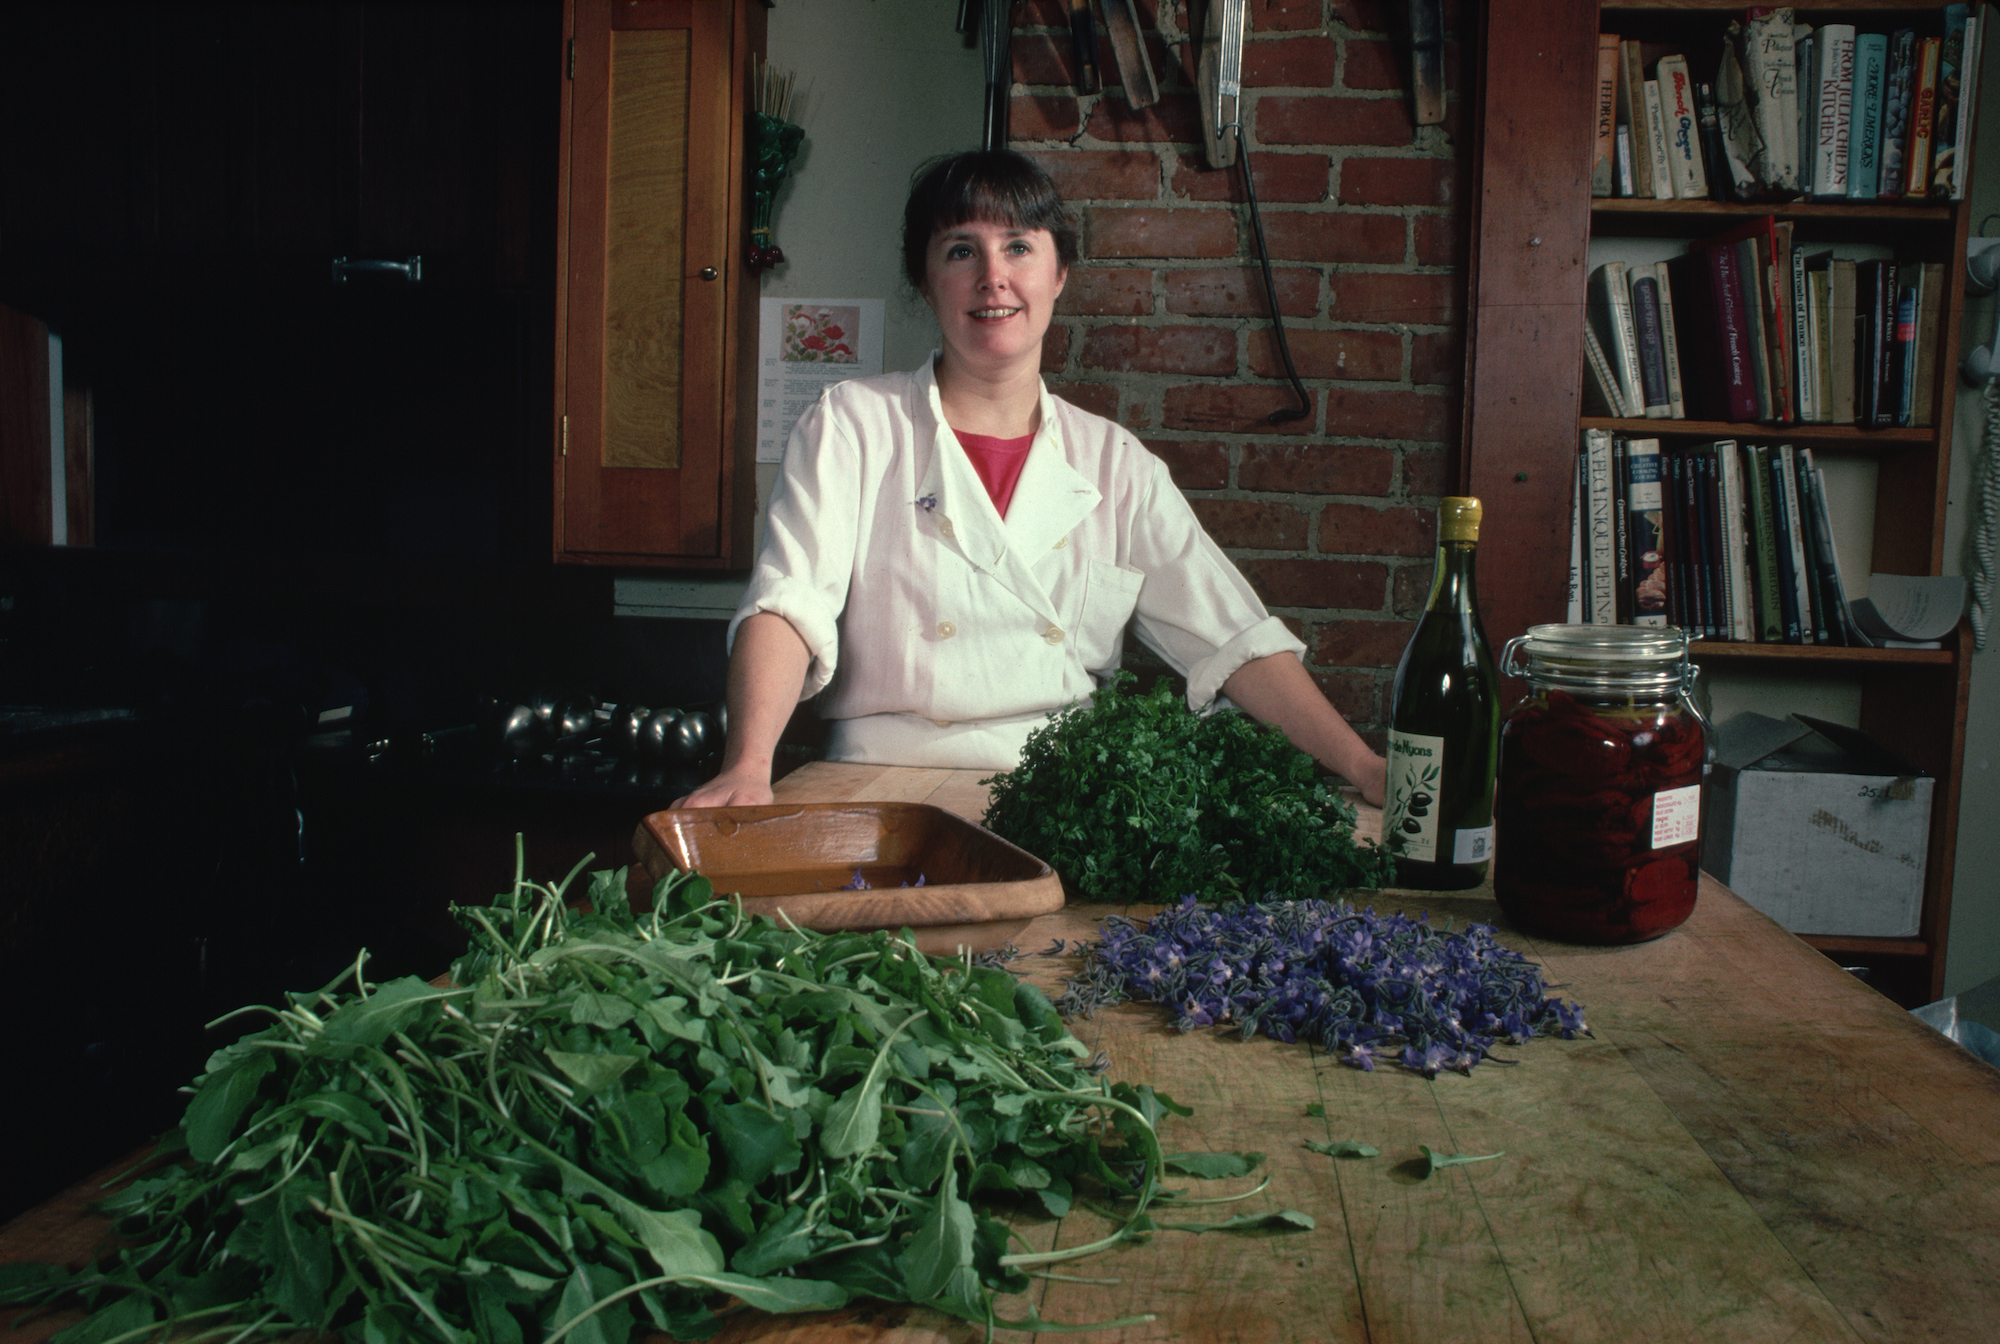 Chef Alice Waters stands behind a large wooden table covered in fresh produce, a large pile of baby greens on the left.